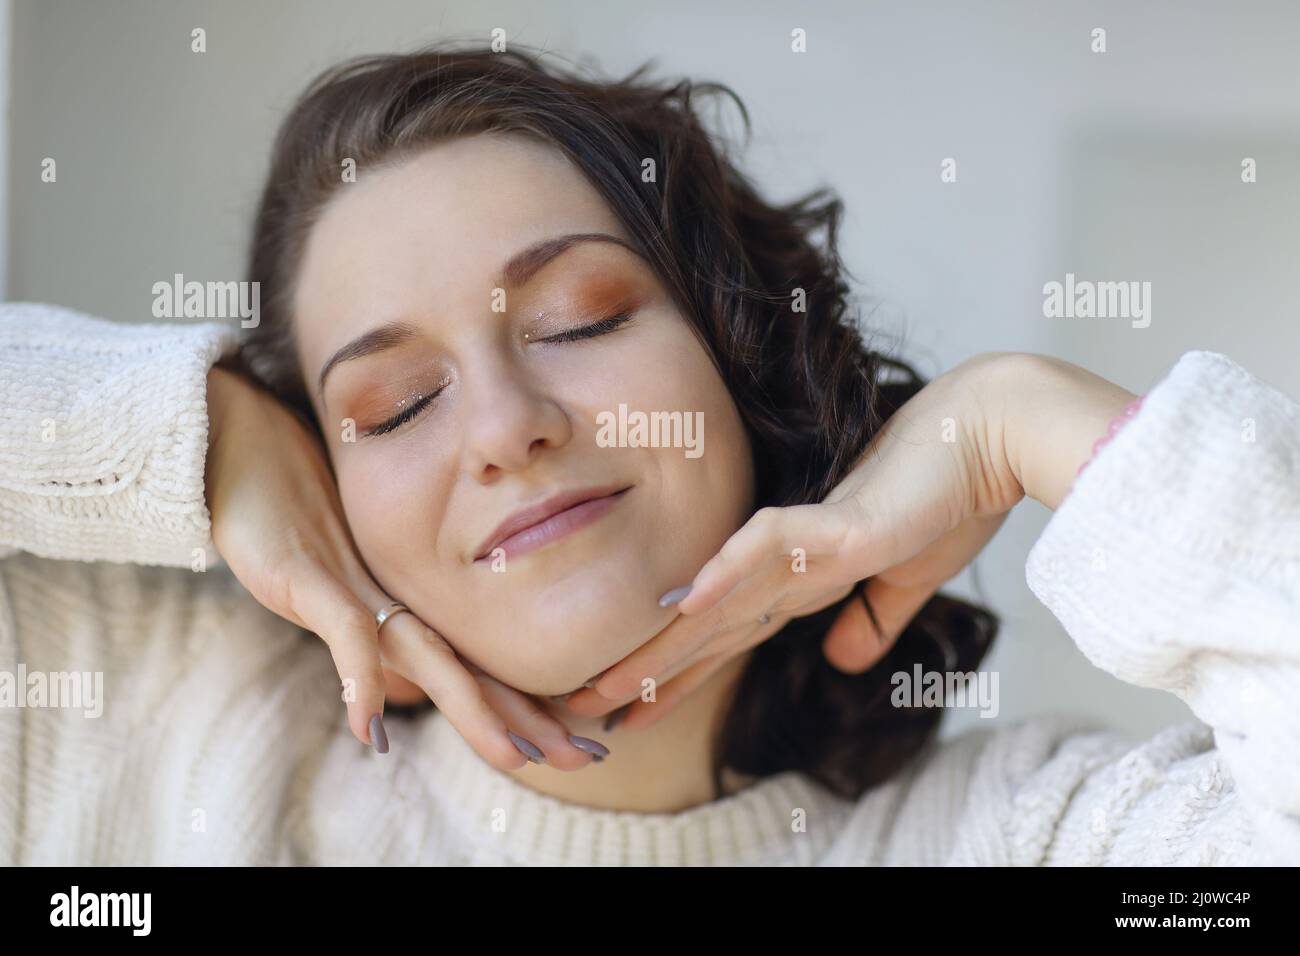 Close portrait of young happy pleased brunette girl with closed eyes touching clean fresh skin Stock Photo